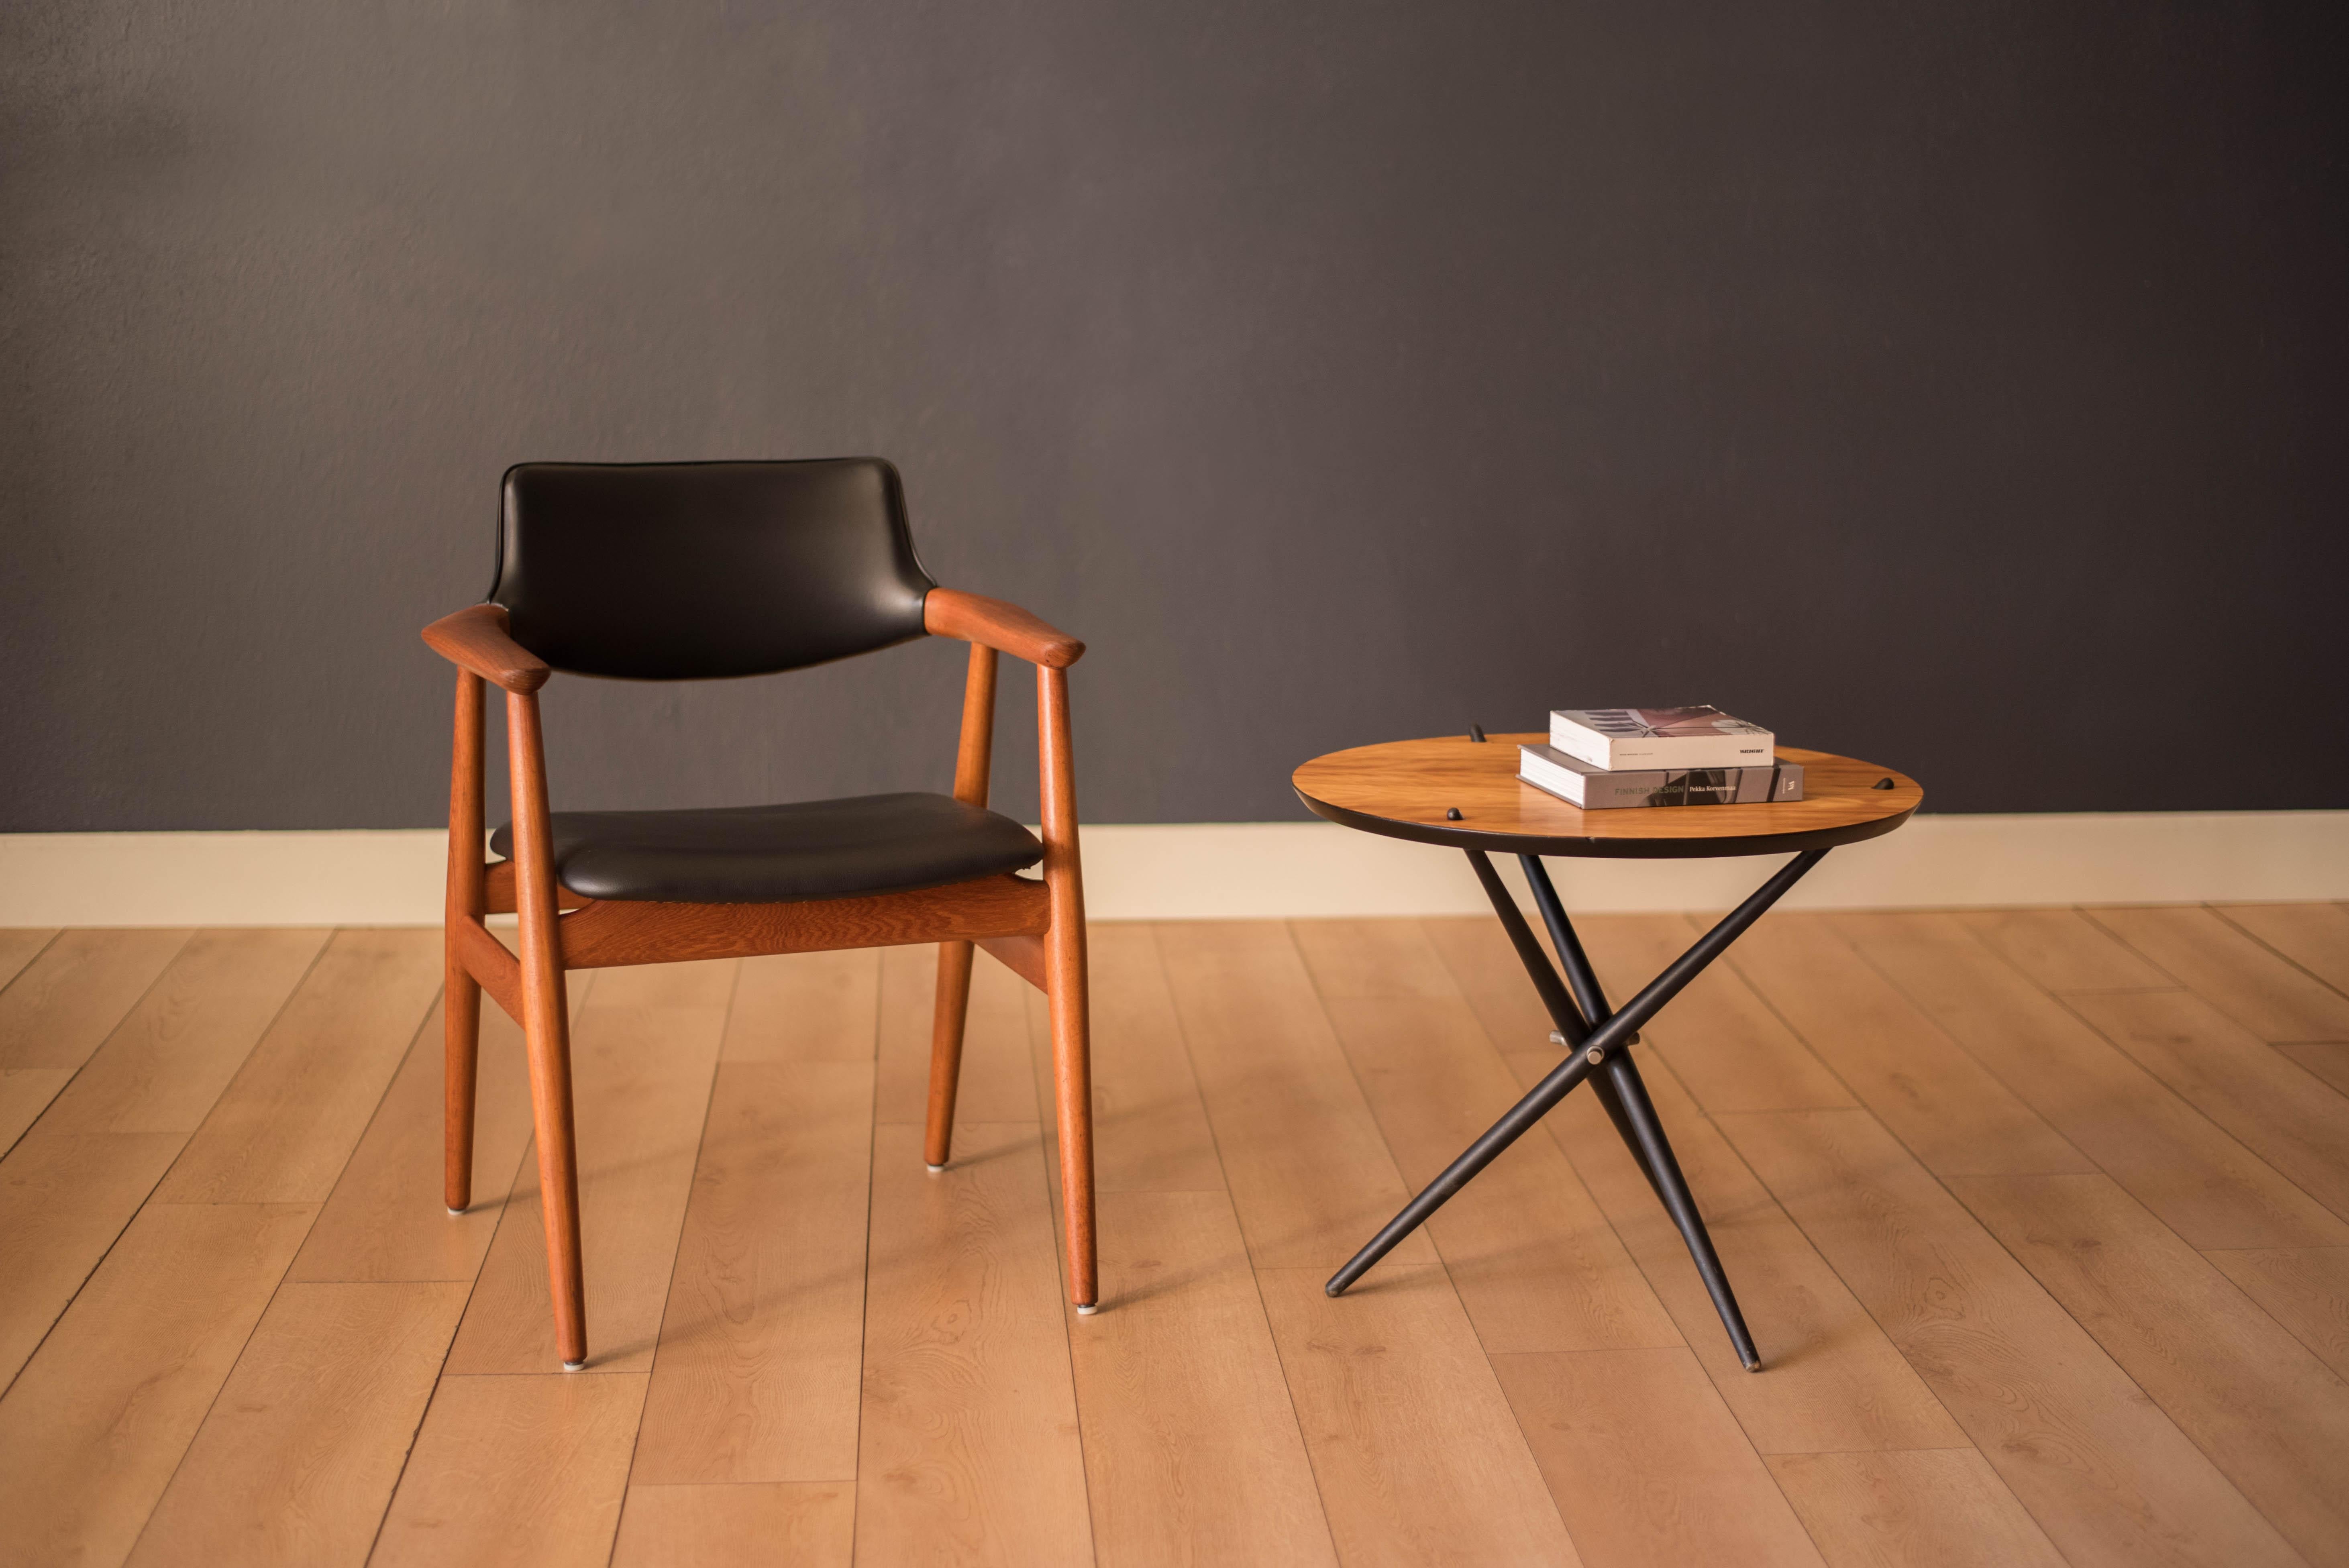 Mid-Century Modern occasional round table designed by Hans Bellmann for Knoll, circa 1948. This piece features a two-toned maple top supported by an ebonized tripod wood base.


Top height 20.25